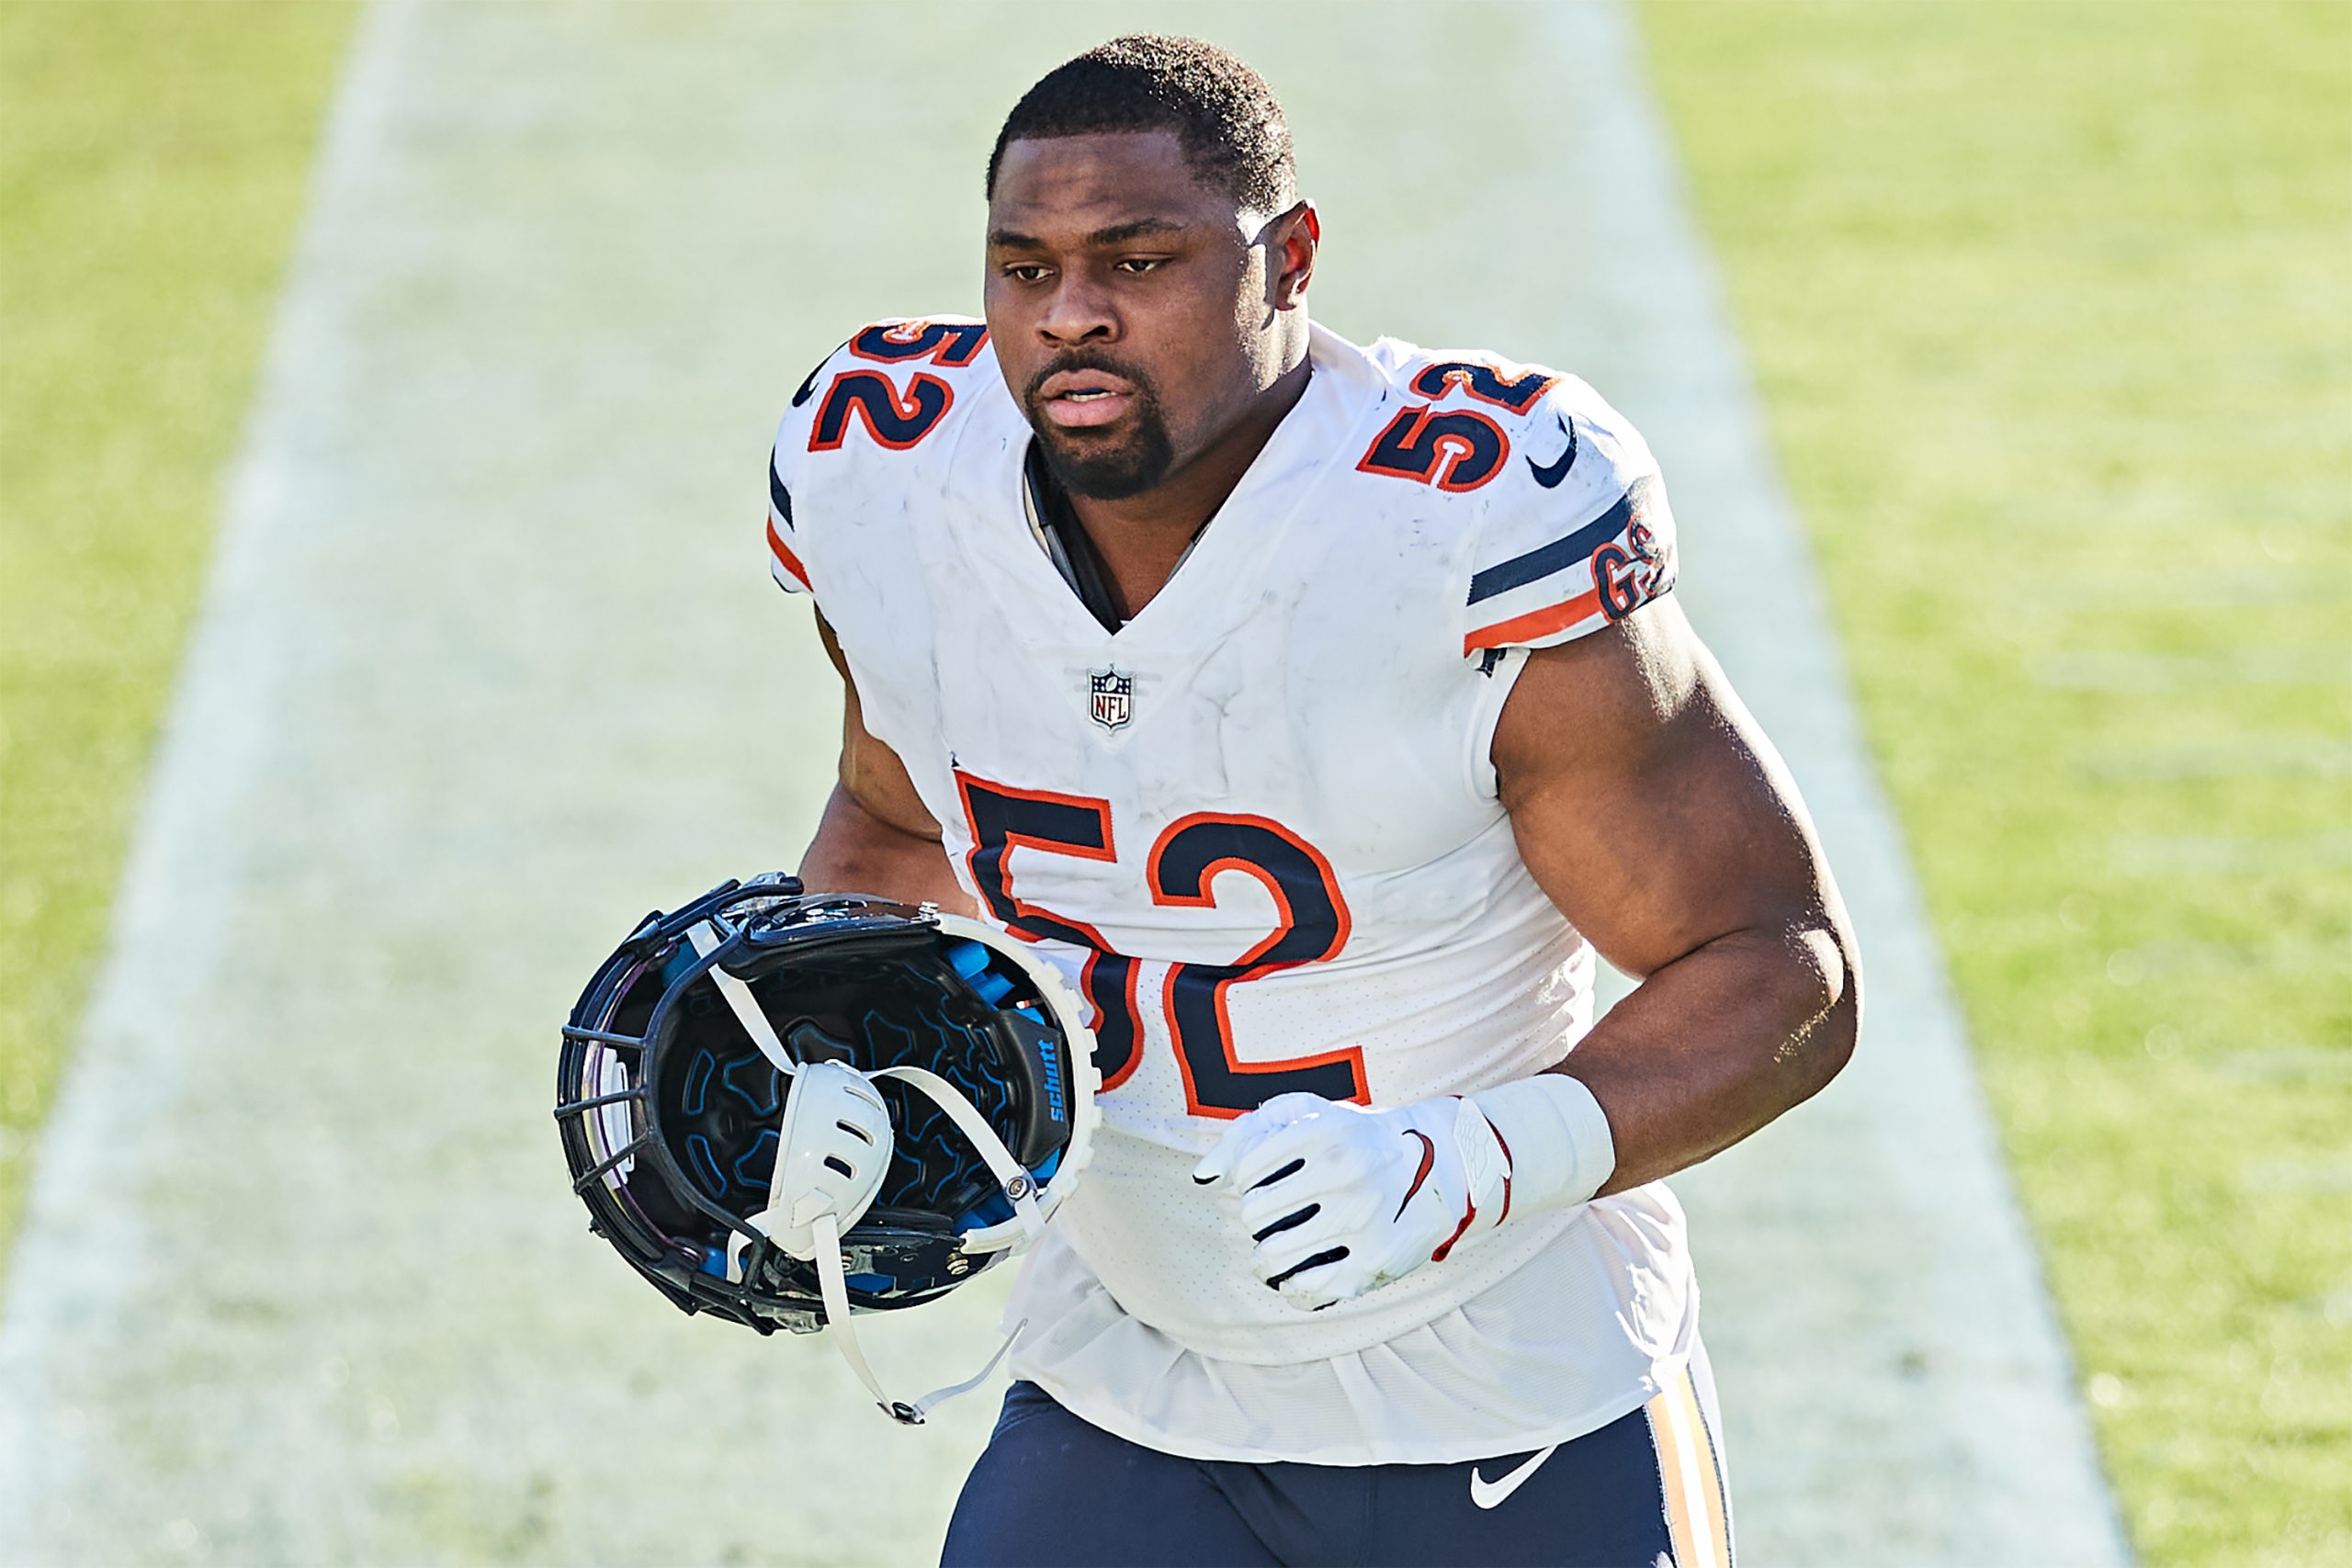 The Bears traded linebacker Khalil Mack to the Chargers Thursday